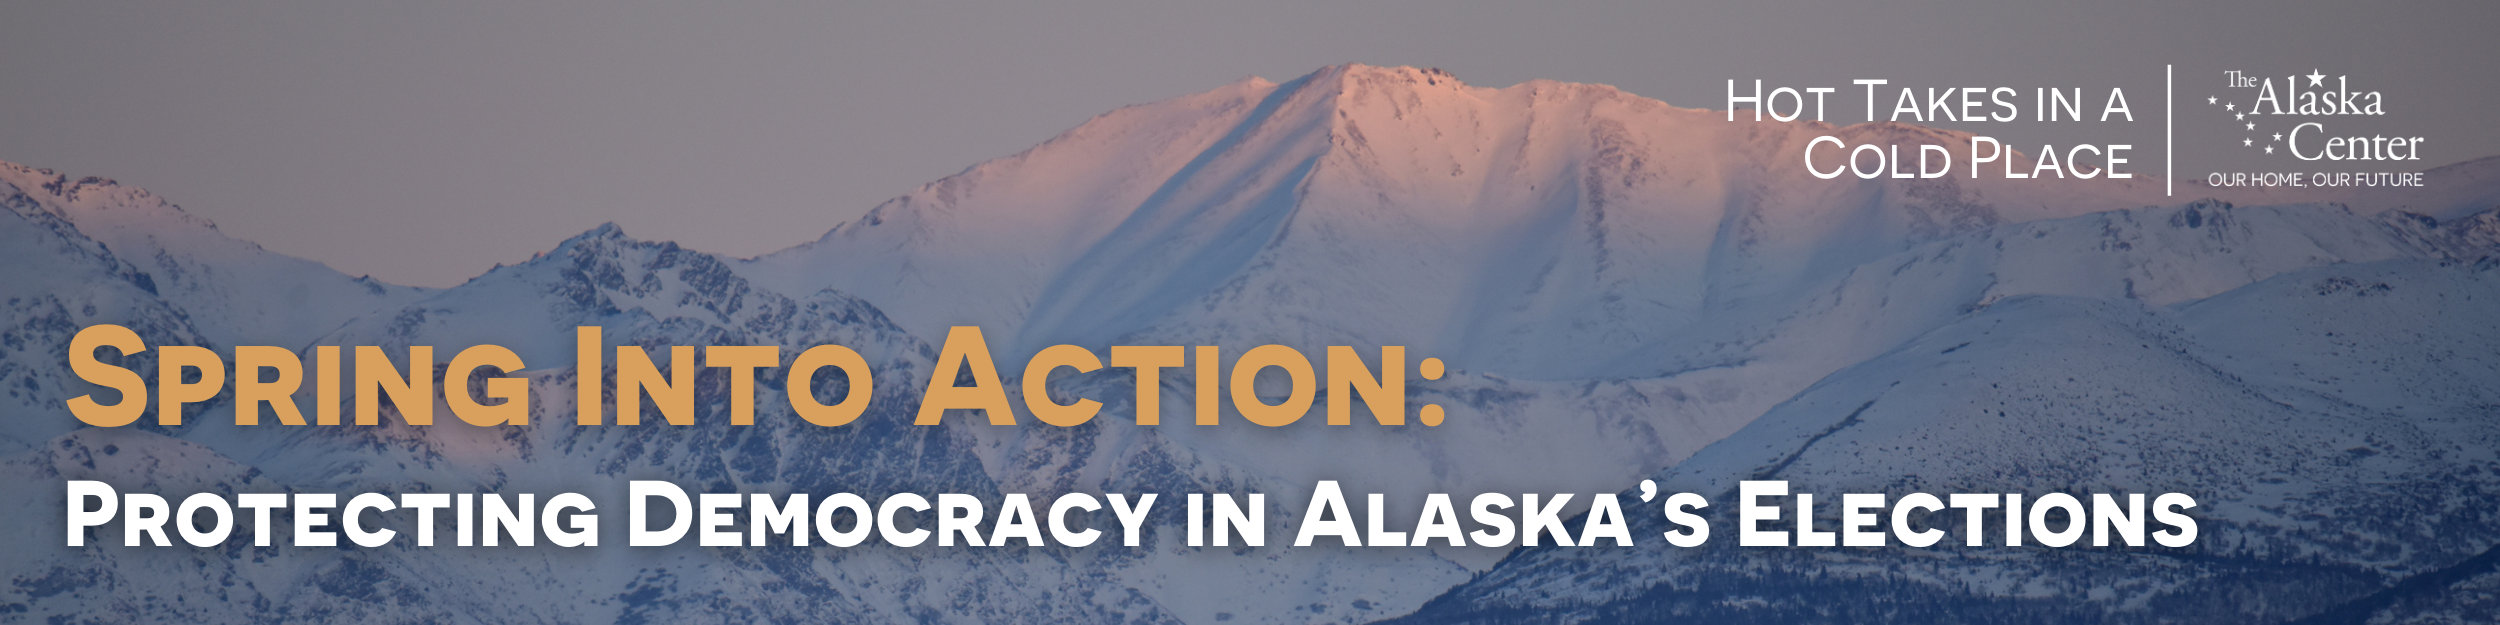 Featured image for “Spring Into Action: Protecting Democracy in Alaska’s Elections”